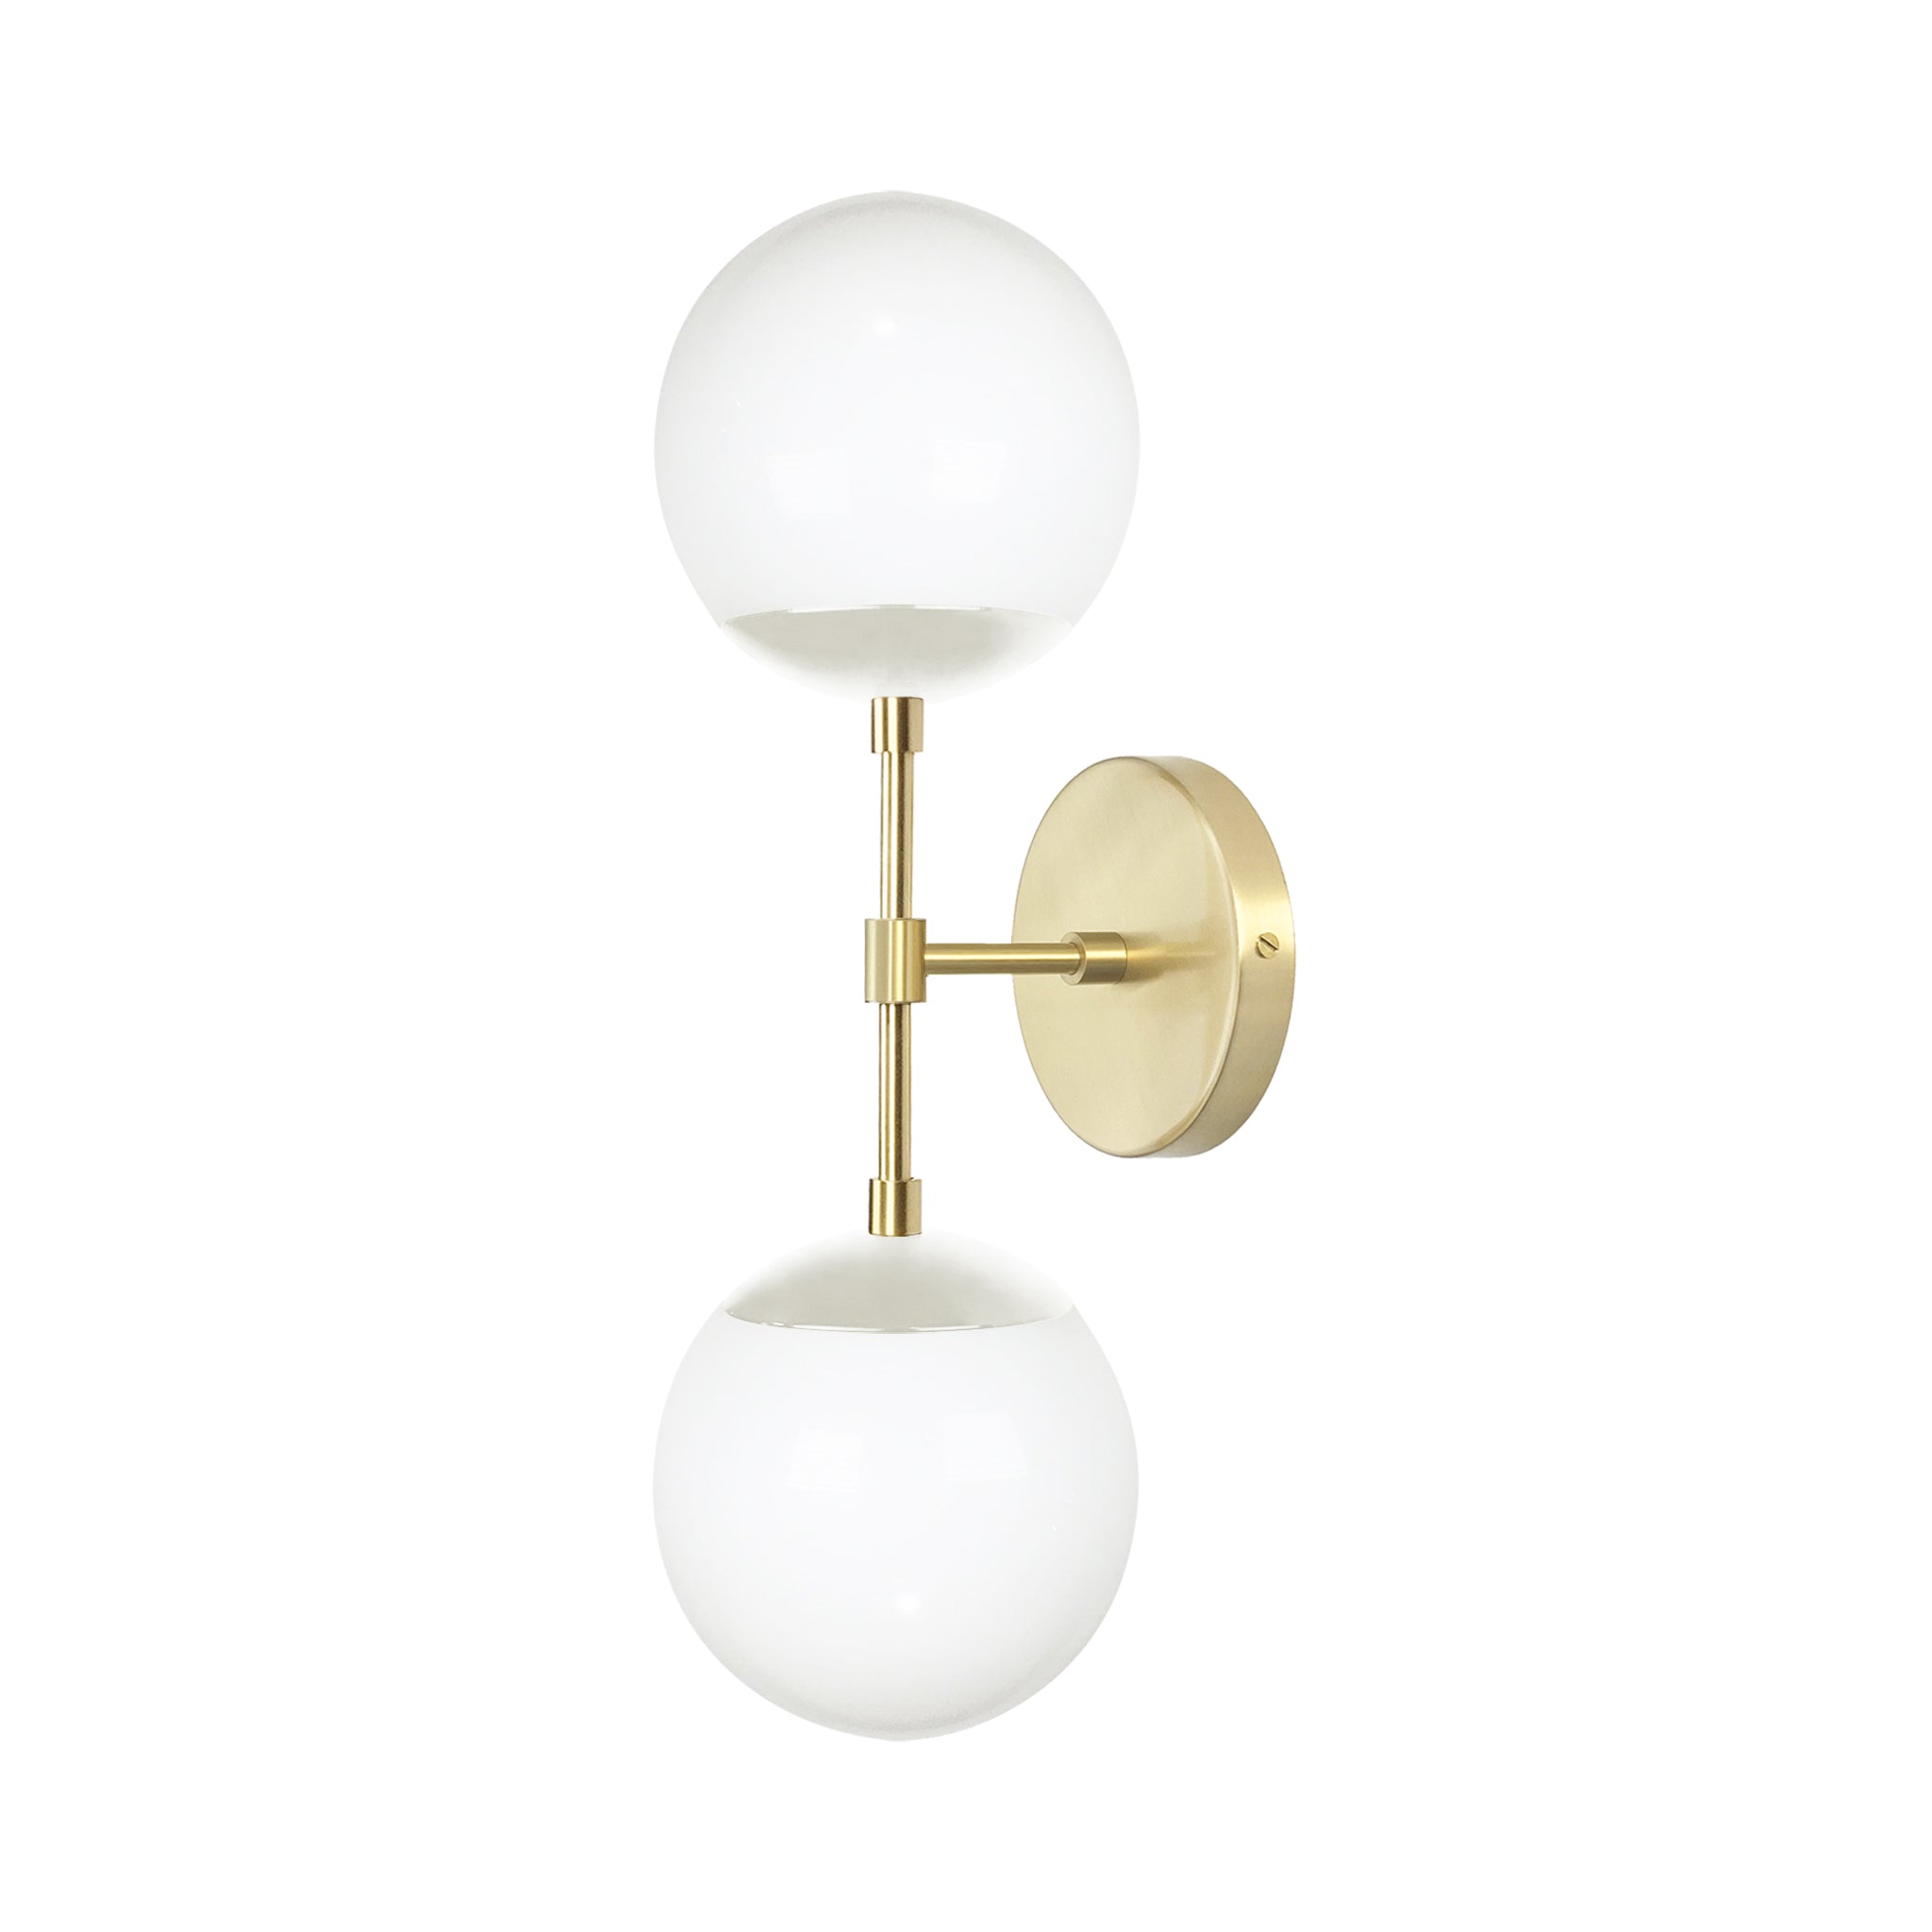 Brass and bone color Cap Double sconce 6" Dutton Brown lighting